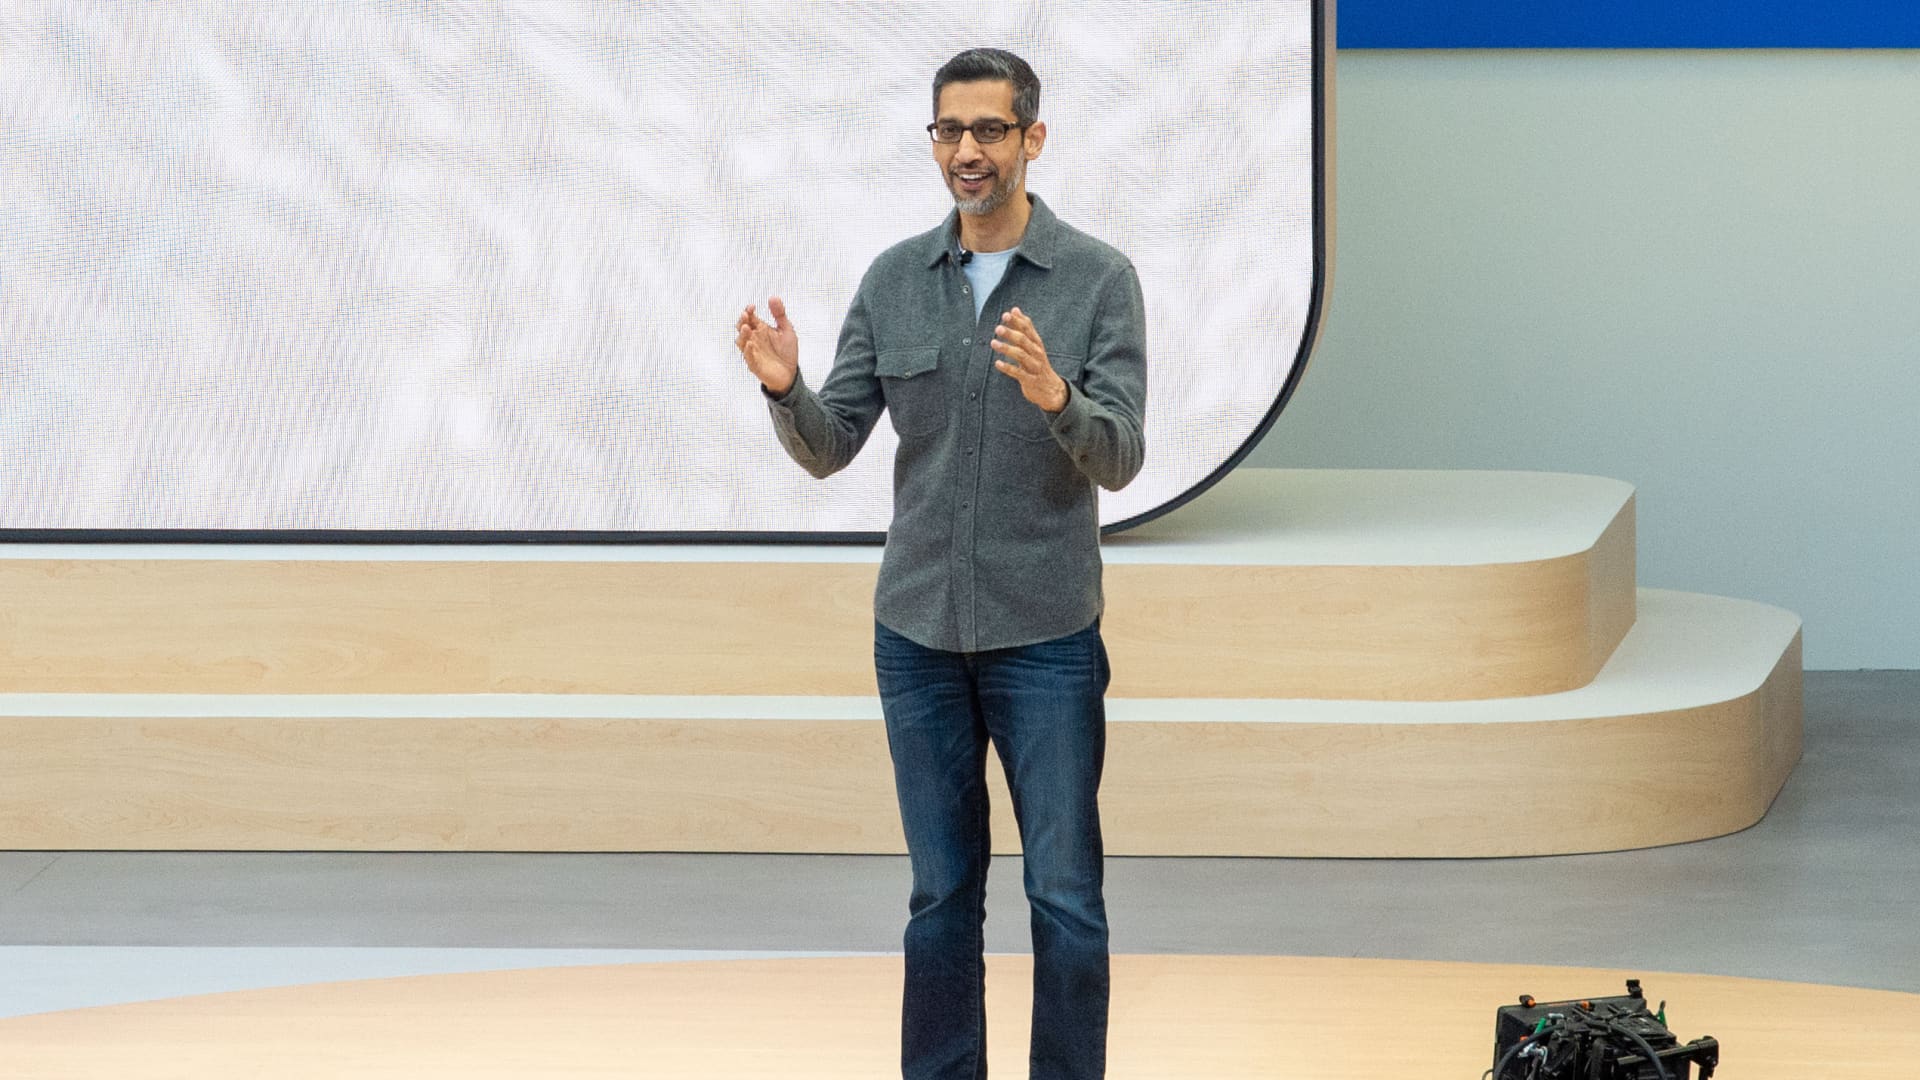 Google I/O wrap-up: Gemini AI updates, new research options and much more